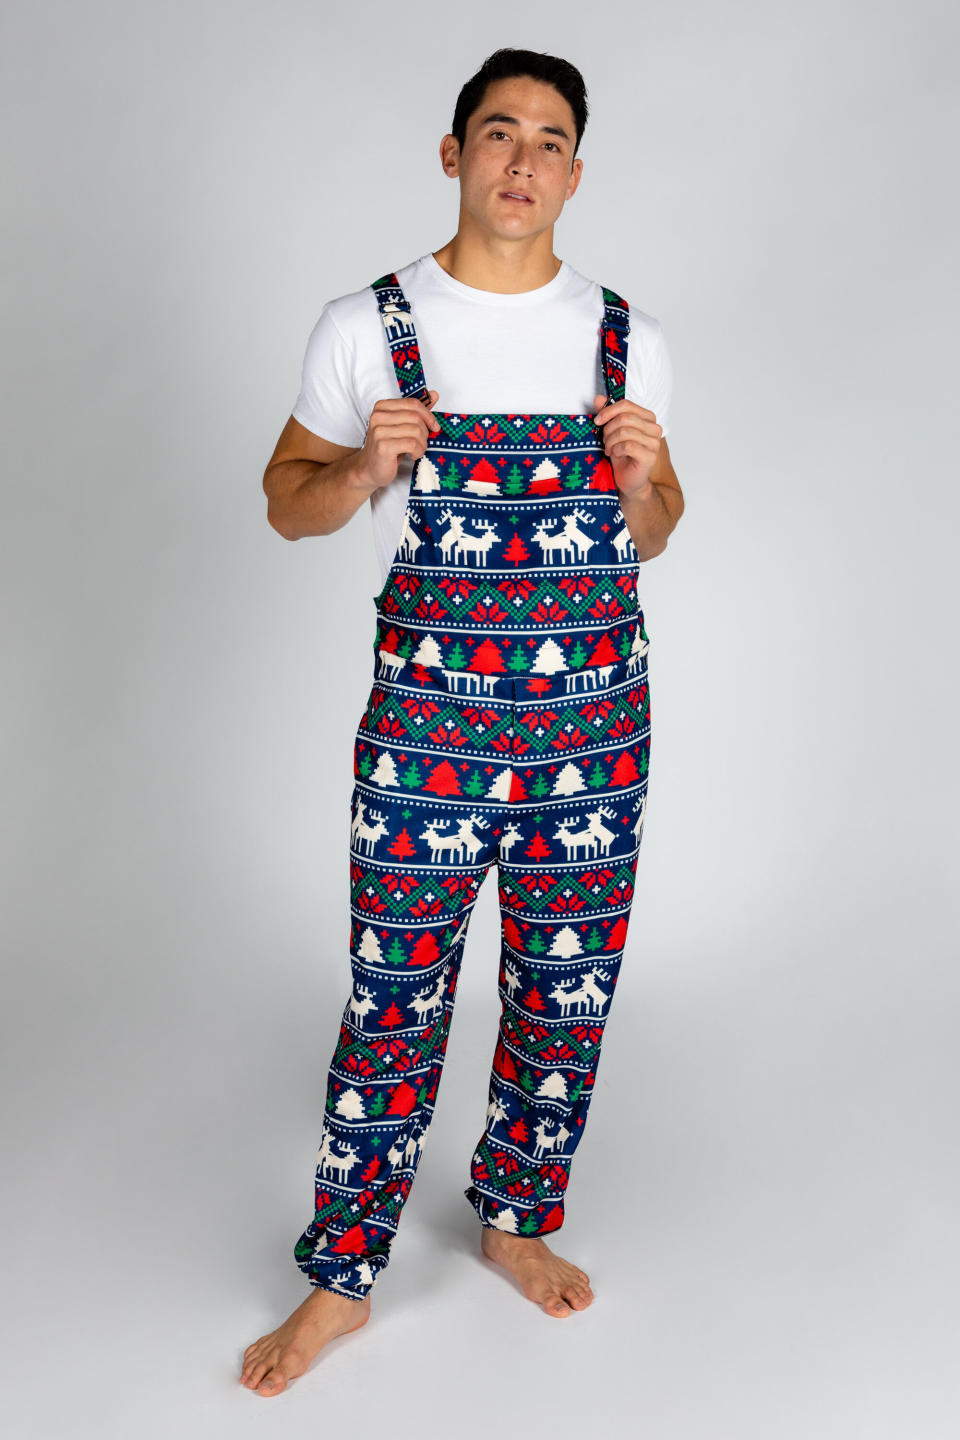 Ugly holiday sweaters had their day, but there are other kinds of equally ugly festive apparel. I give you ... <a href="https://www.shinesty.com/products/the-caribou-lous-mens-christmas-pajamaralls" target="_blank" rel="noopener noreferrer">the pajamarall.</a>